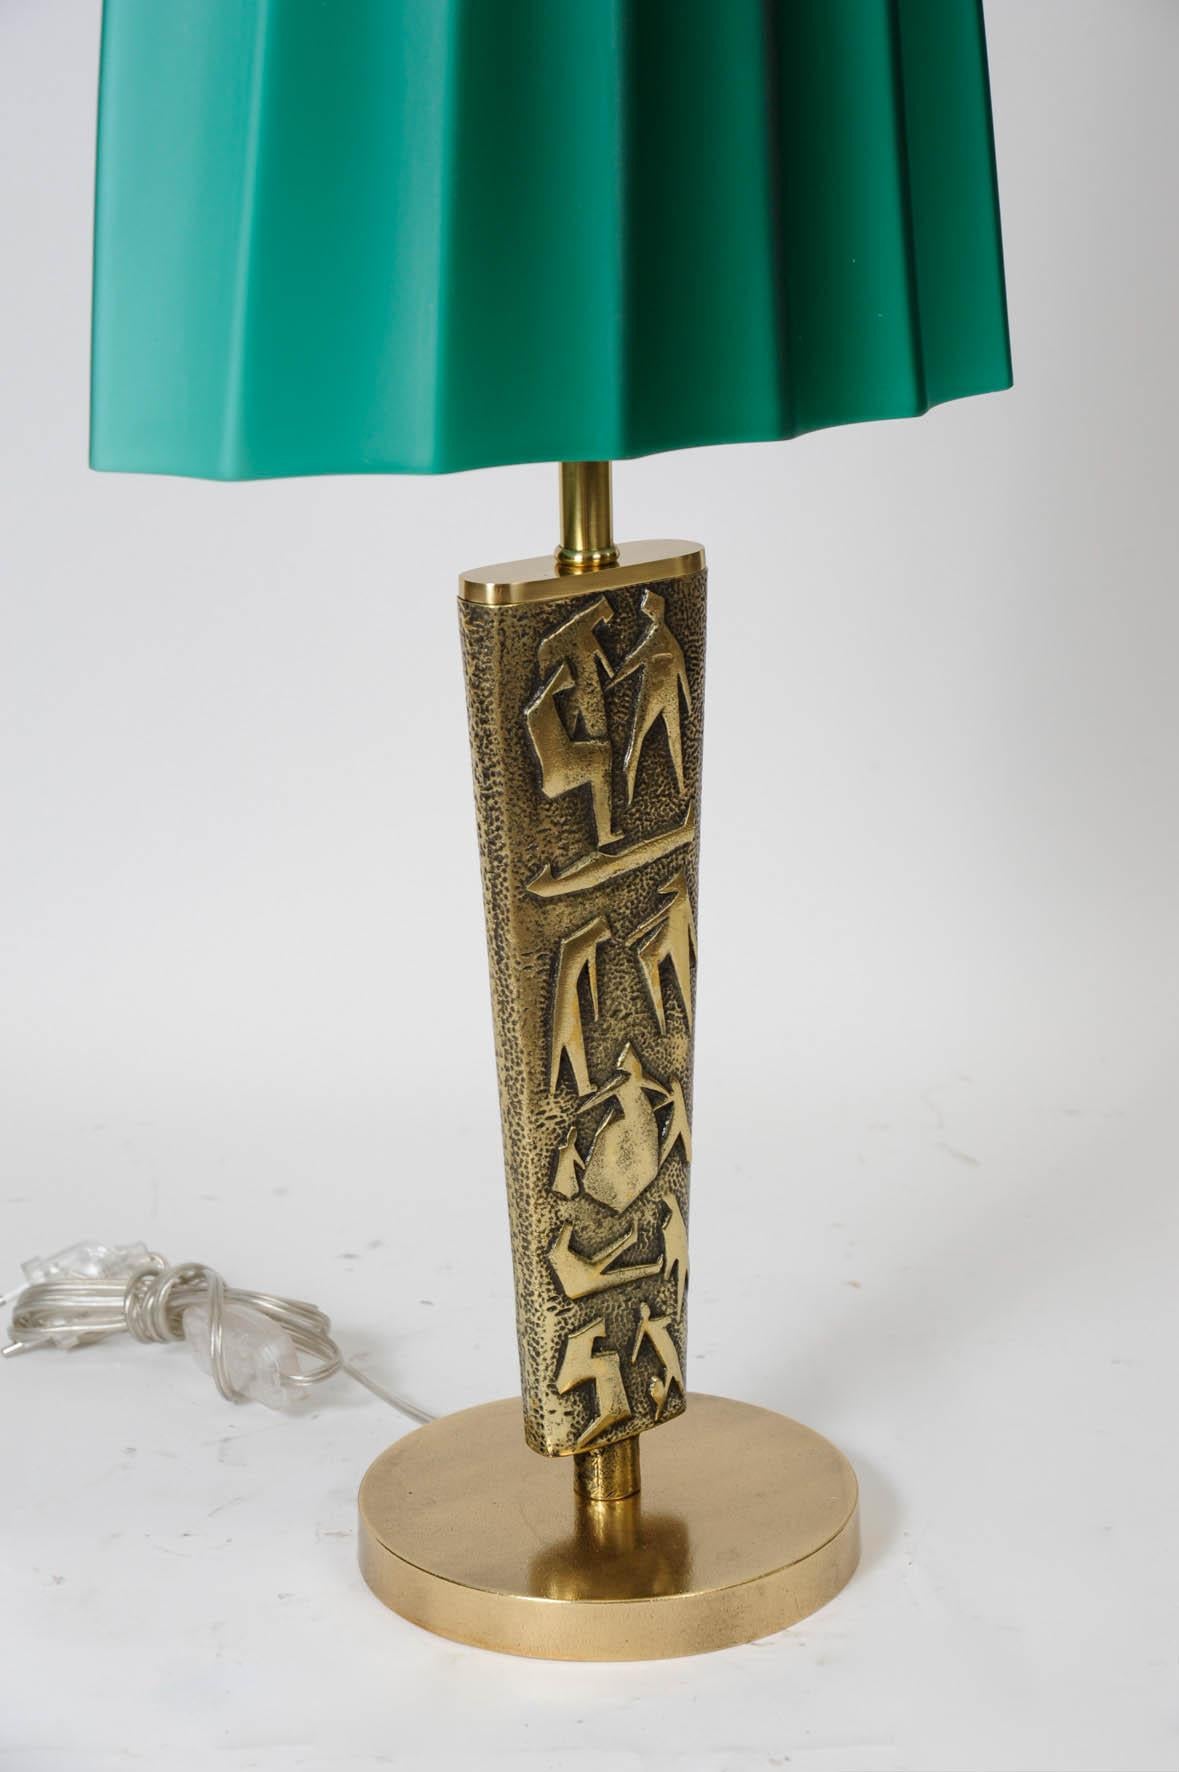 Pair of bronze table lamps with green opaline glass shade.